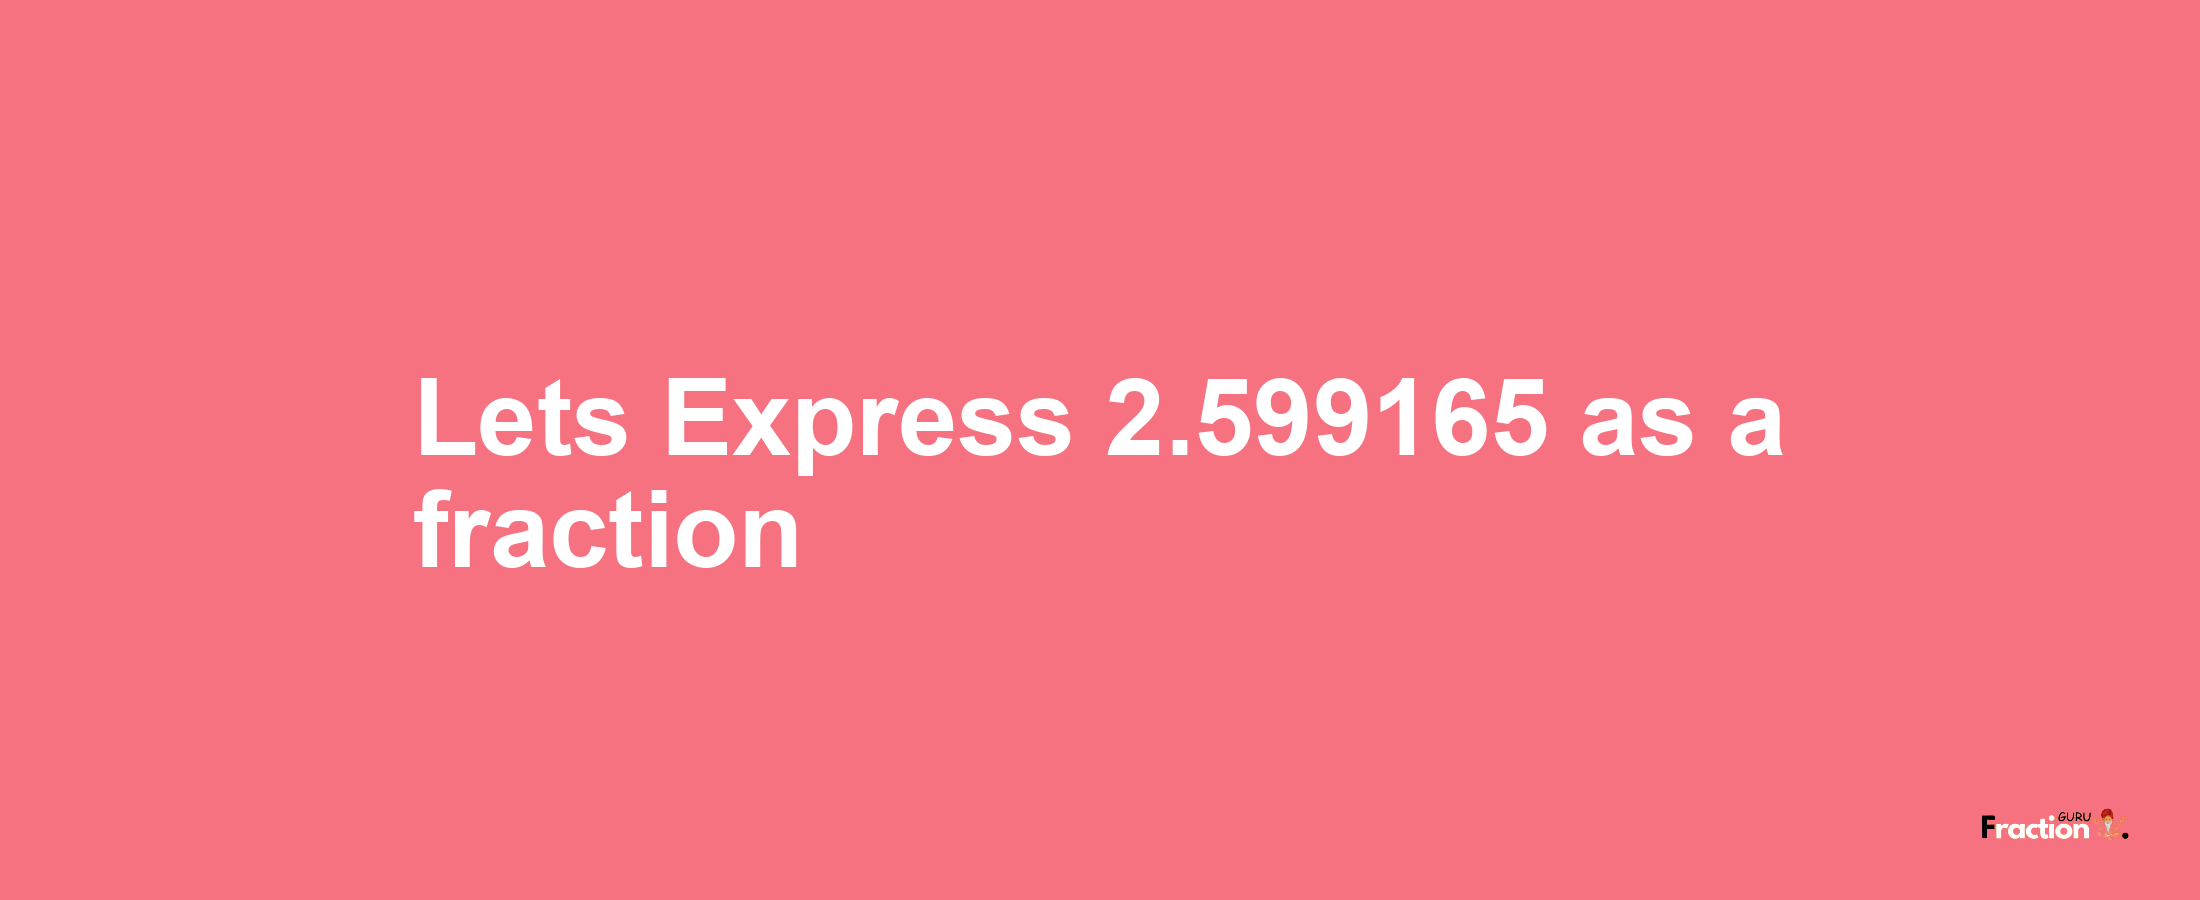 Lets Express 2.599165 as afraction